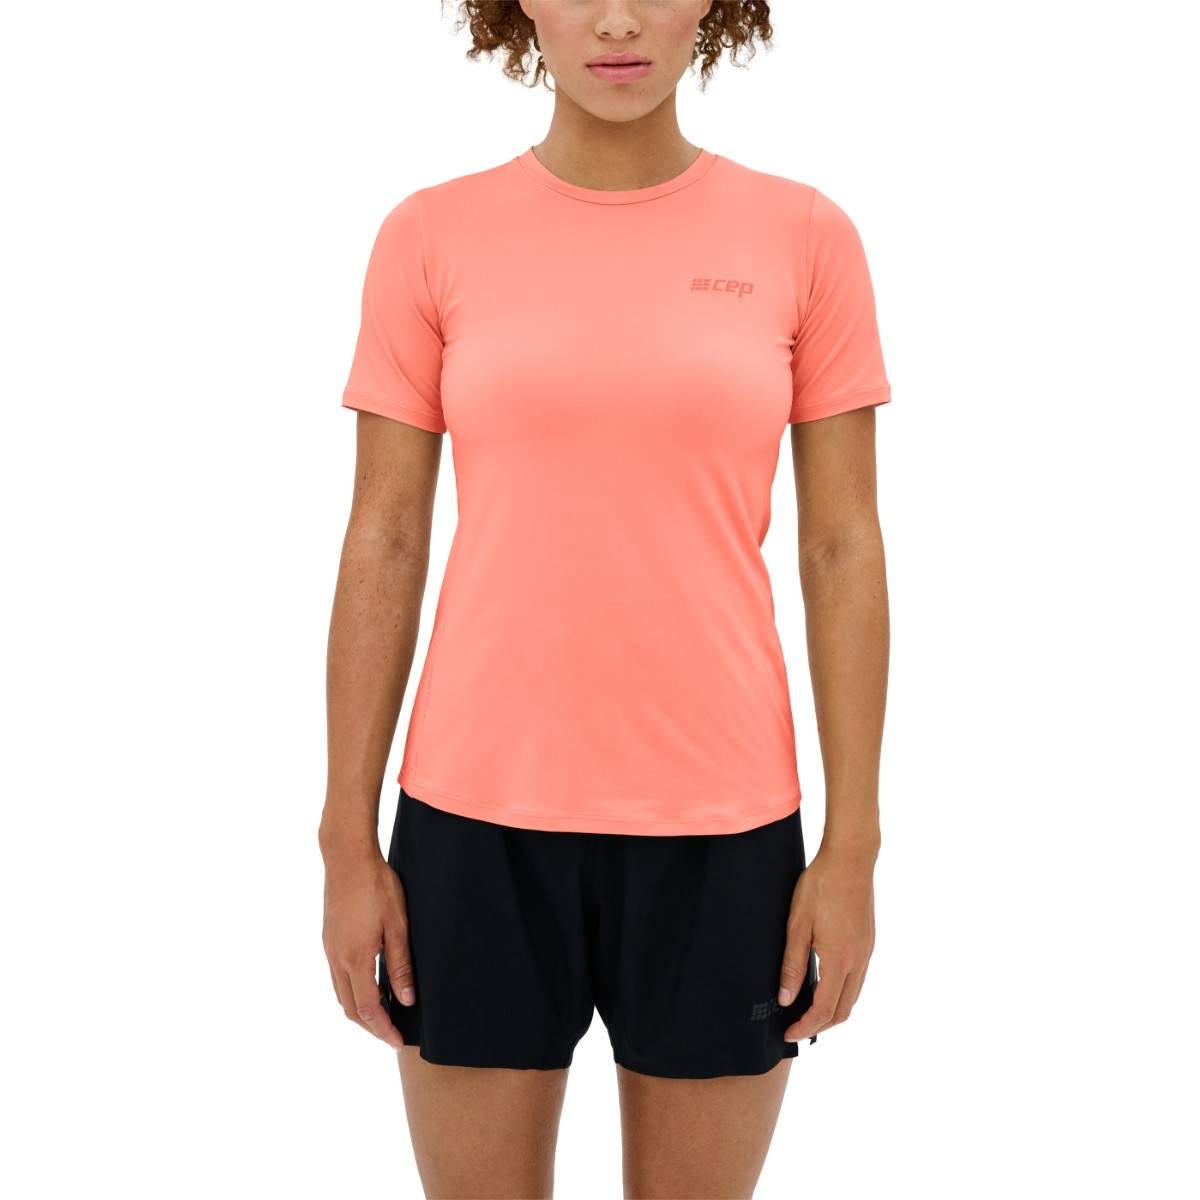 Picture of CEP The Run Round Neck T-Shirt V5 Women - coral